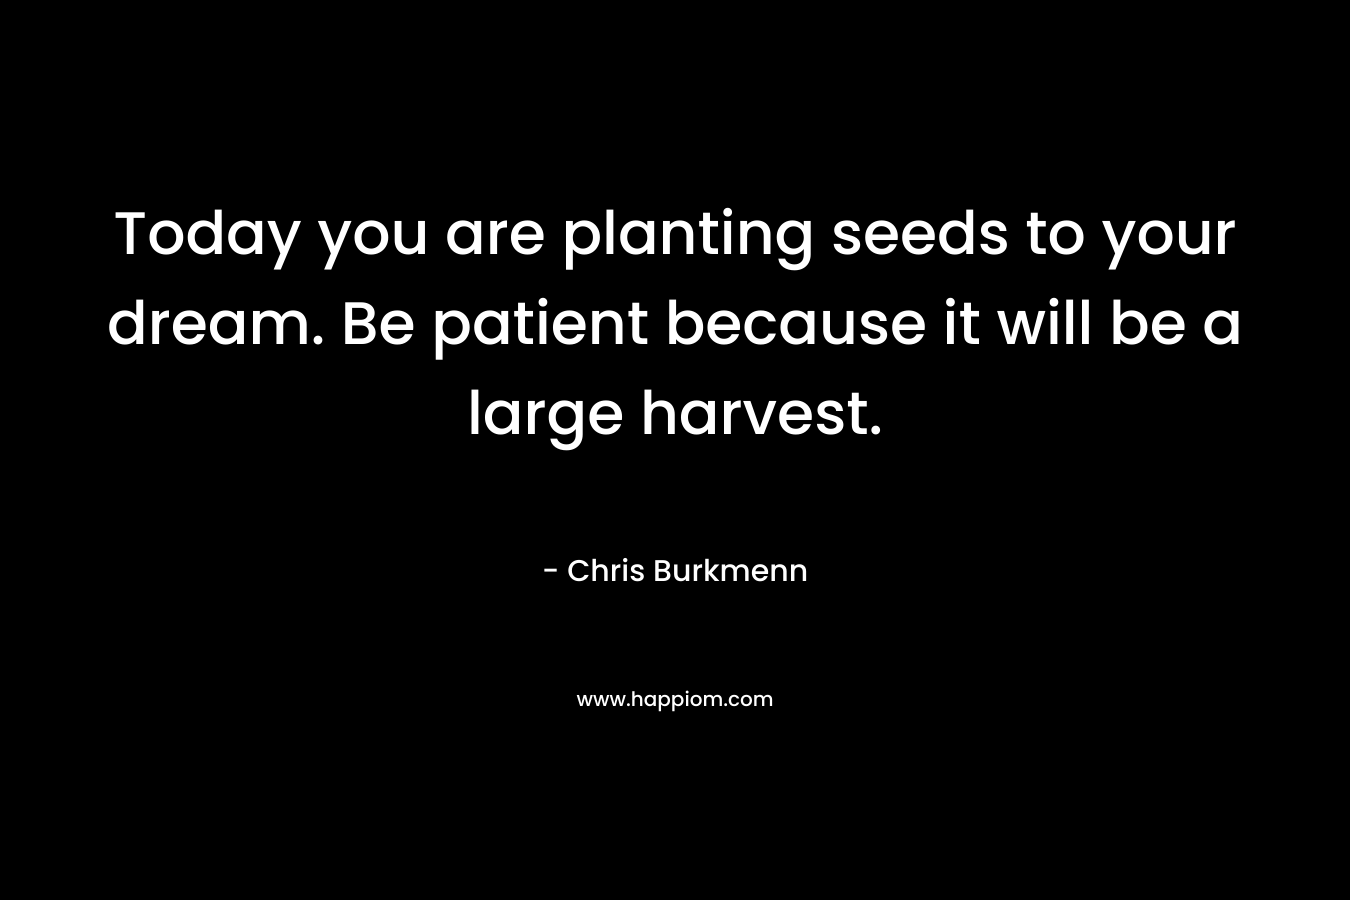 Today you are planting seeds to your dream. Be patient because it will be a large harvest. – Chris Burkmenn